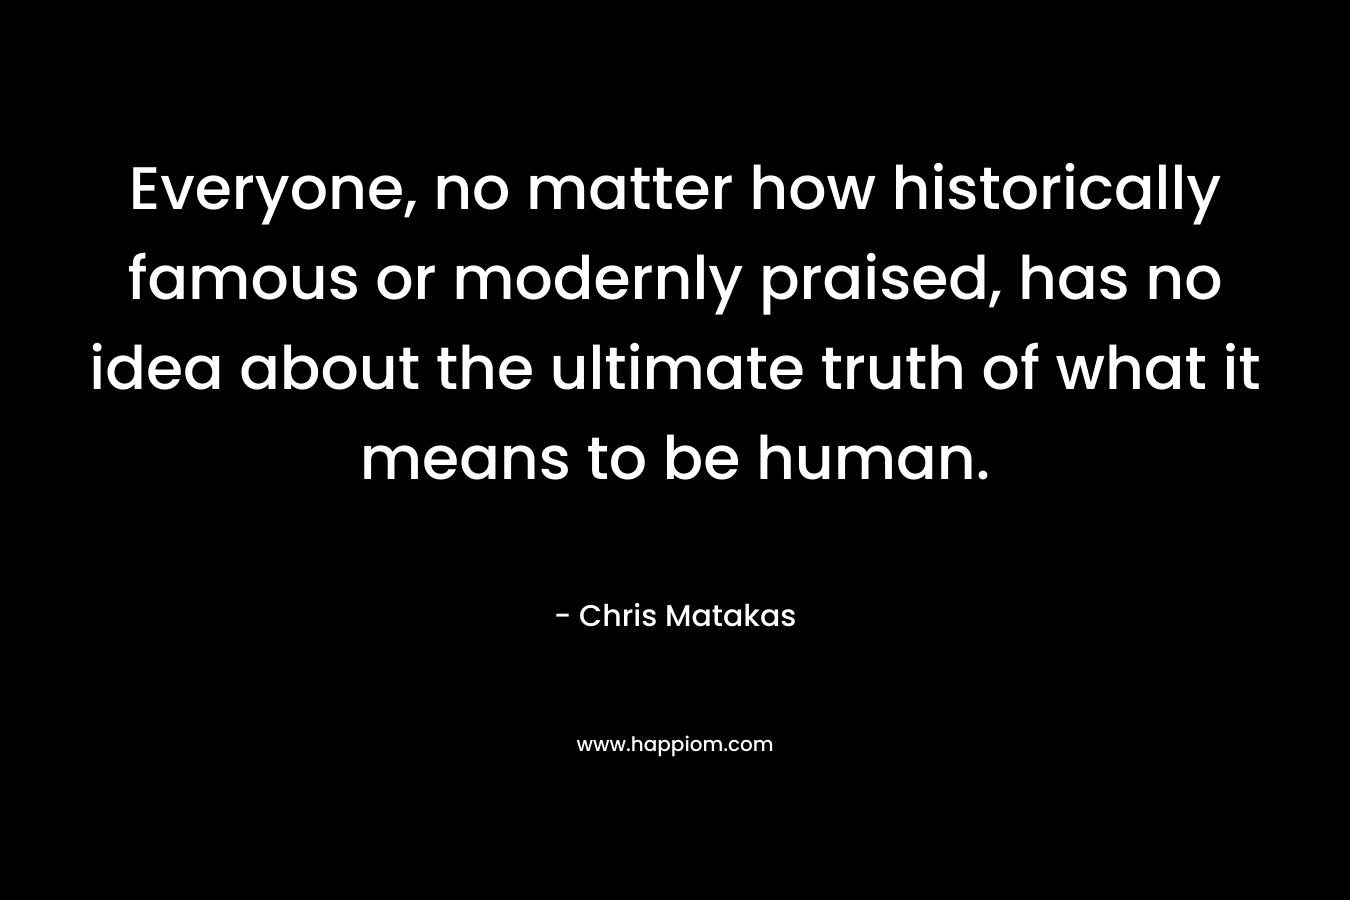 Everyone, no matter how historically famous or modernly praised, has no idea about the ultimate truth of what it means to be human.